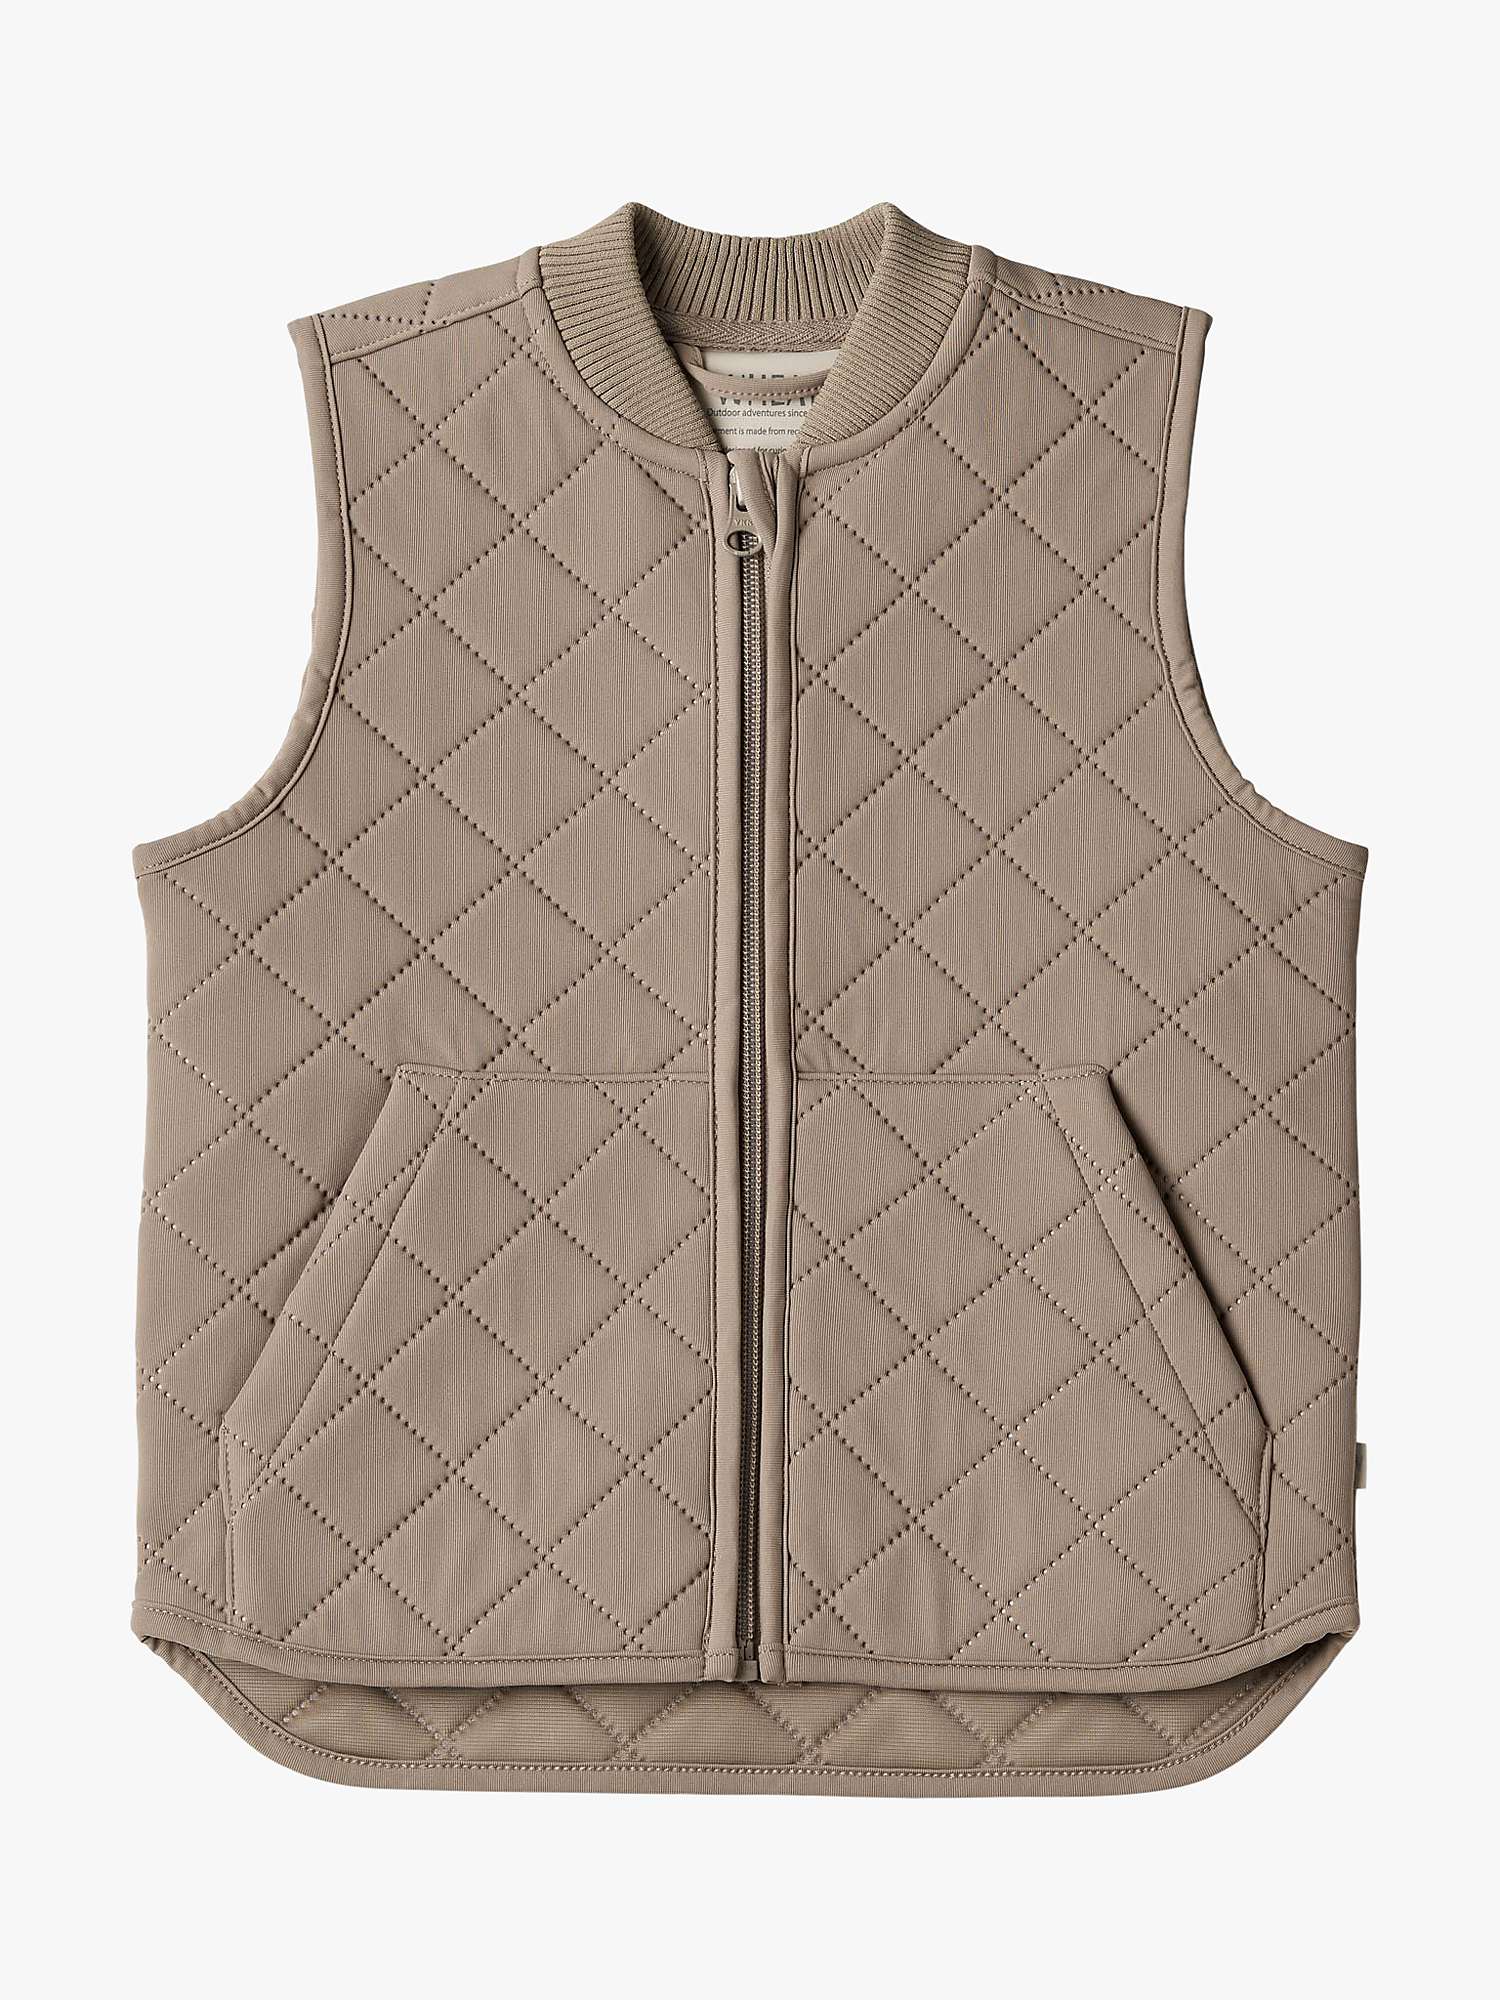 Buy WHEAT Kids' Thermo Gilet Online at johnlewis.com